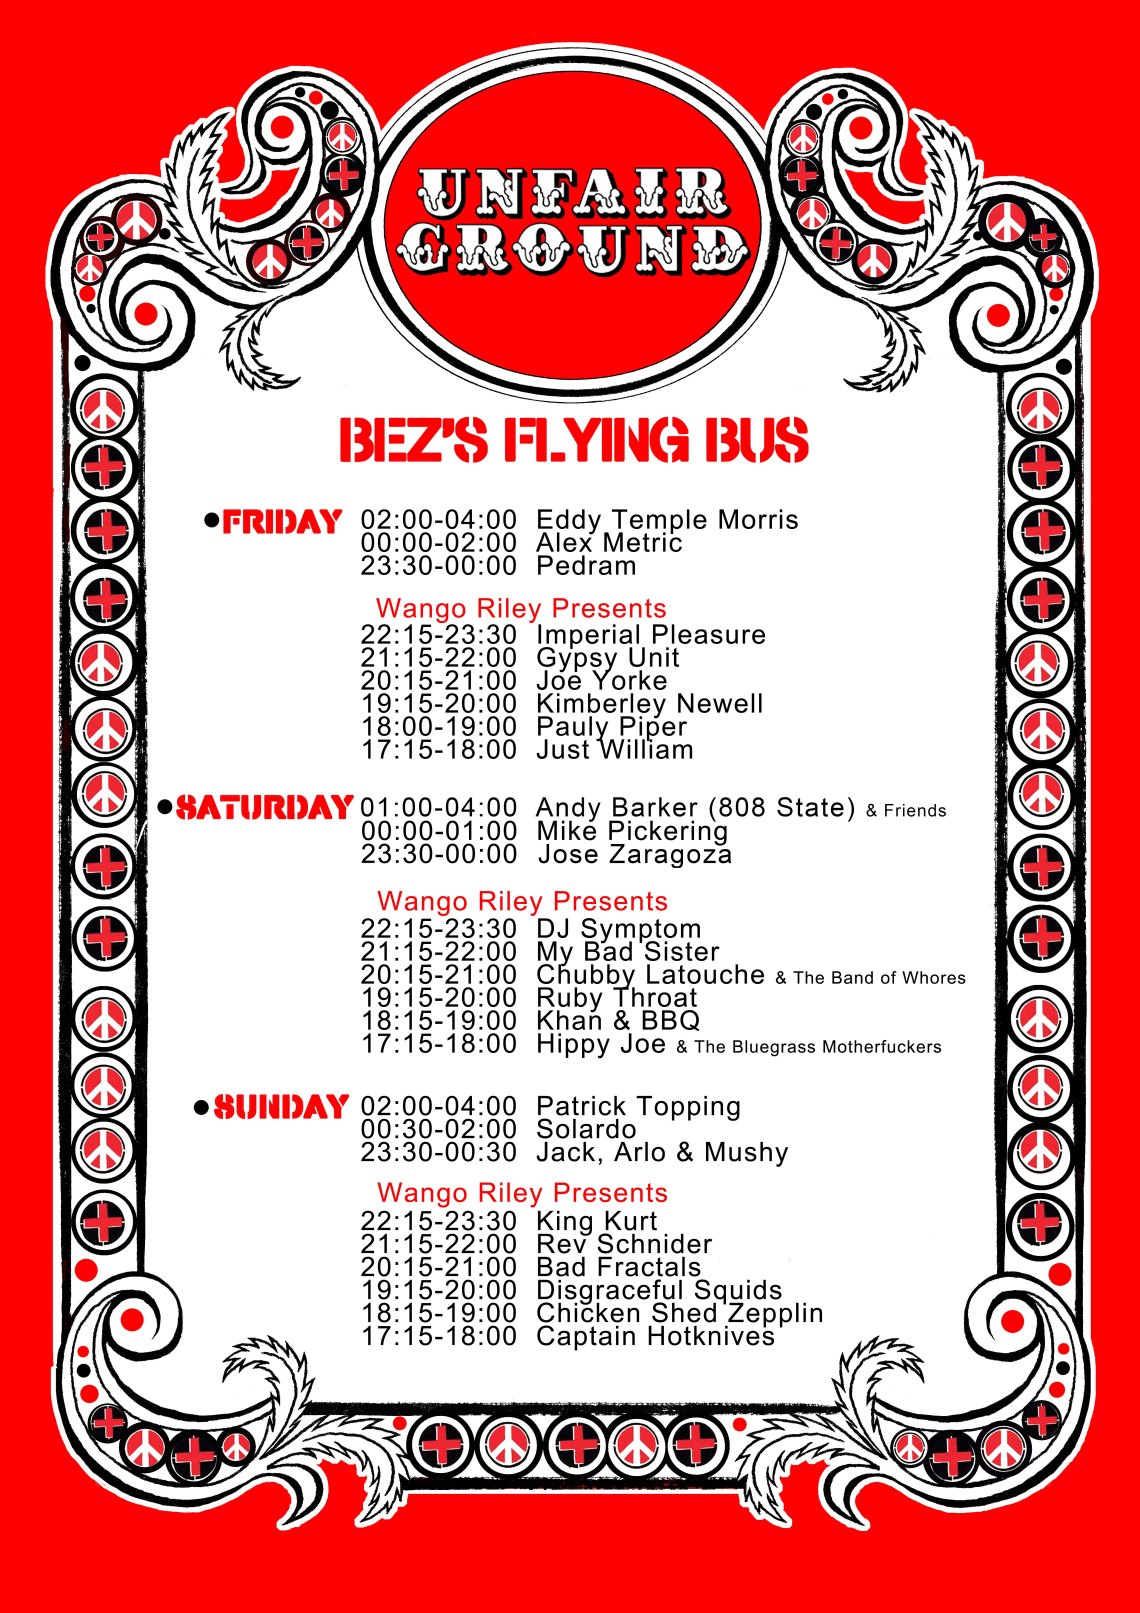 A3 Poster - Bez's Flying Bus